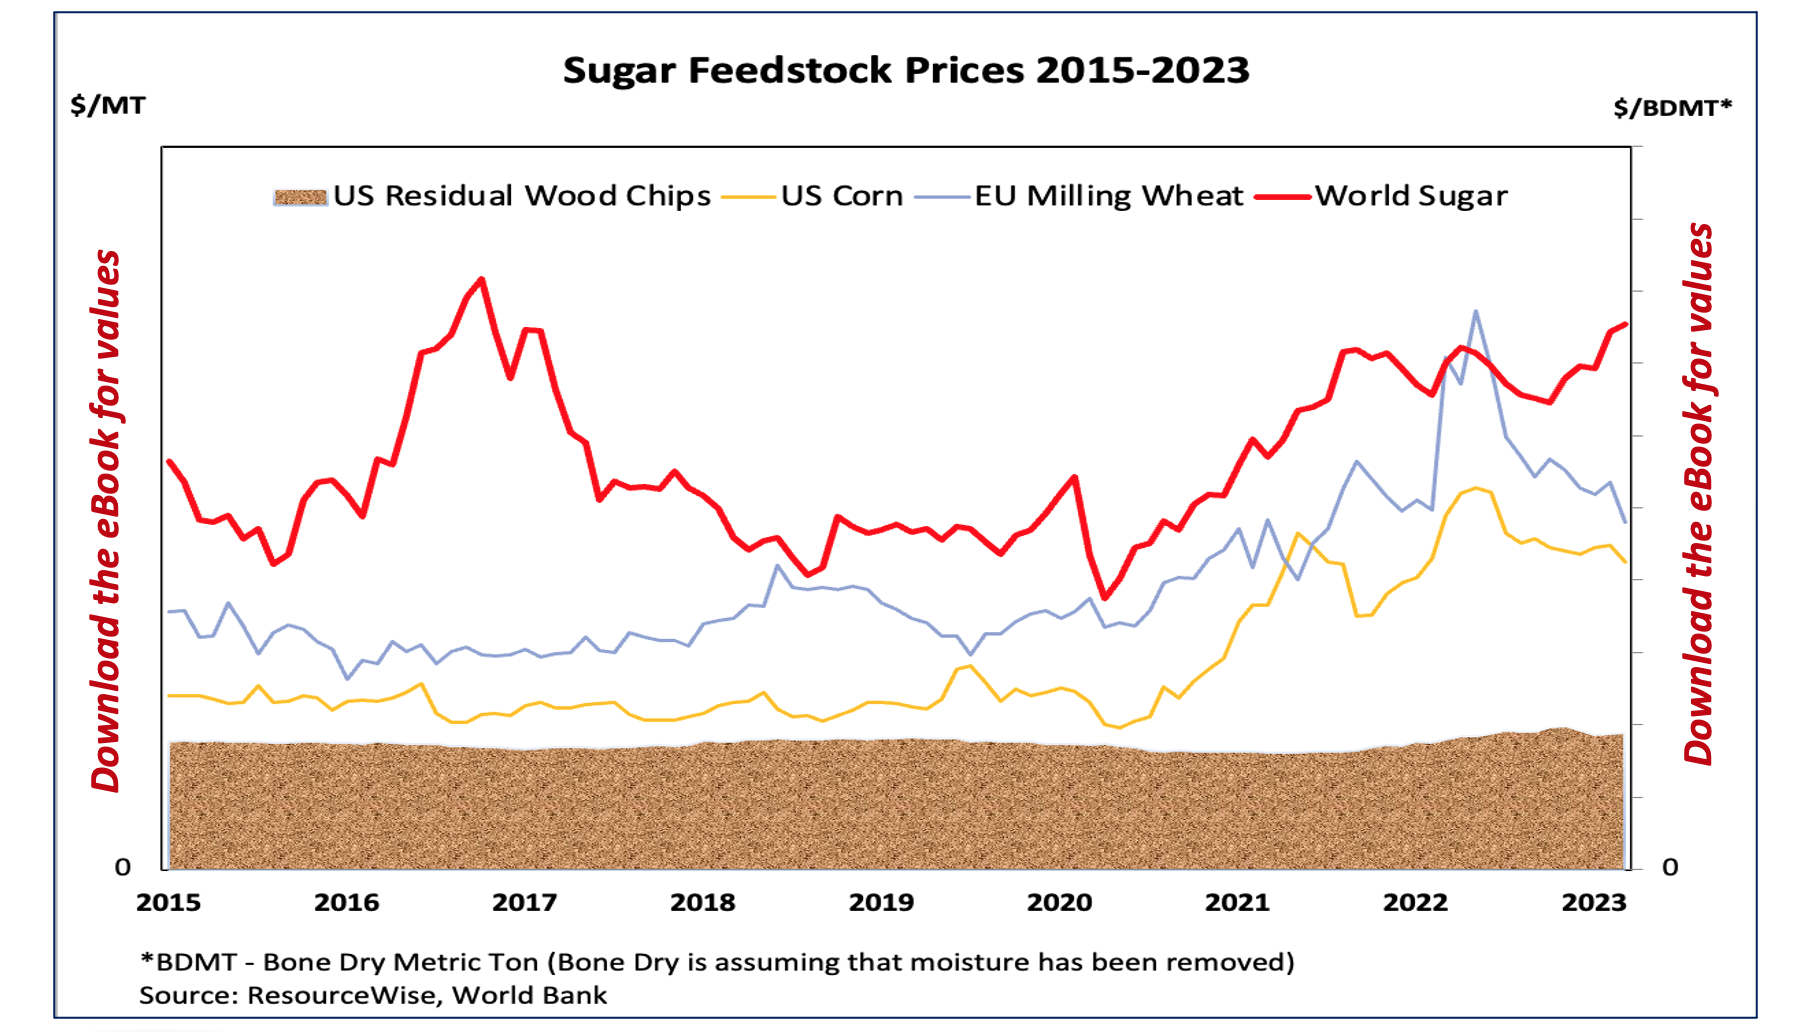 Graph shows prices for sugar-based feedstocks from 2015 to 2023.